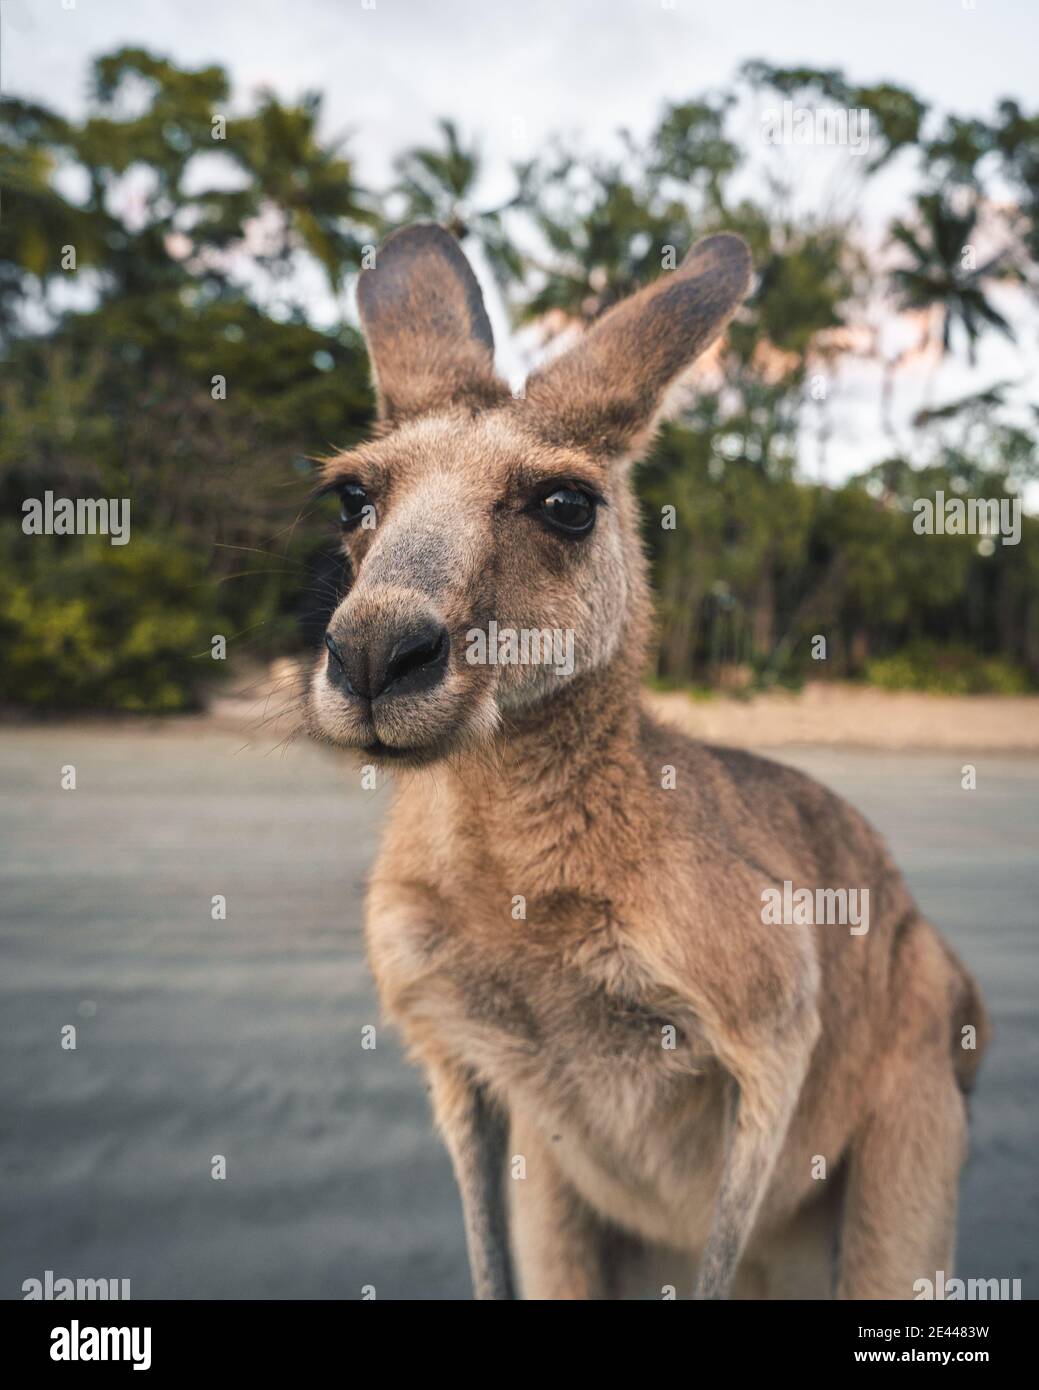 Portrait of adorable eastern grey kangaroo joey standing on beach near palm trees in national park in Australia Stock Photo